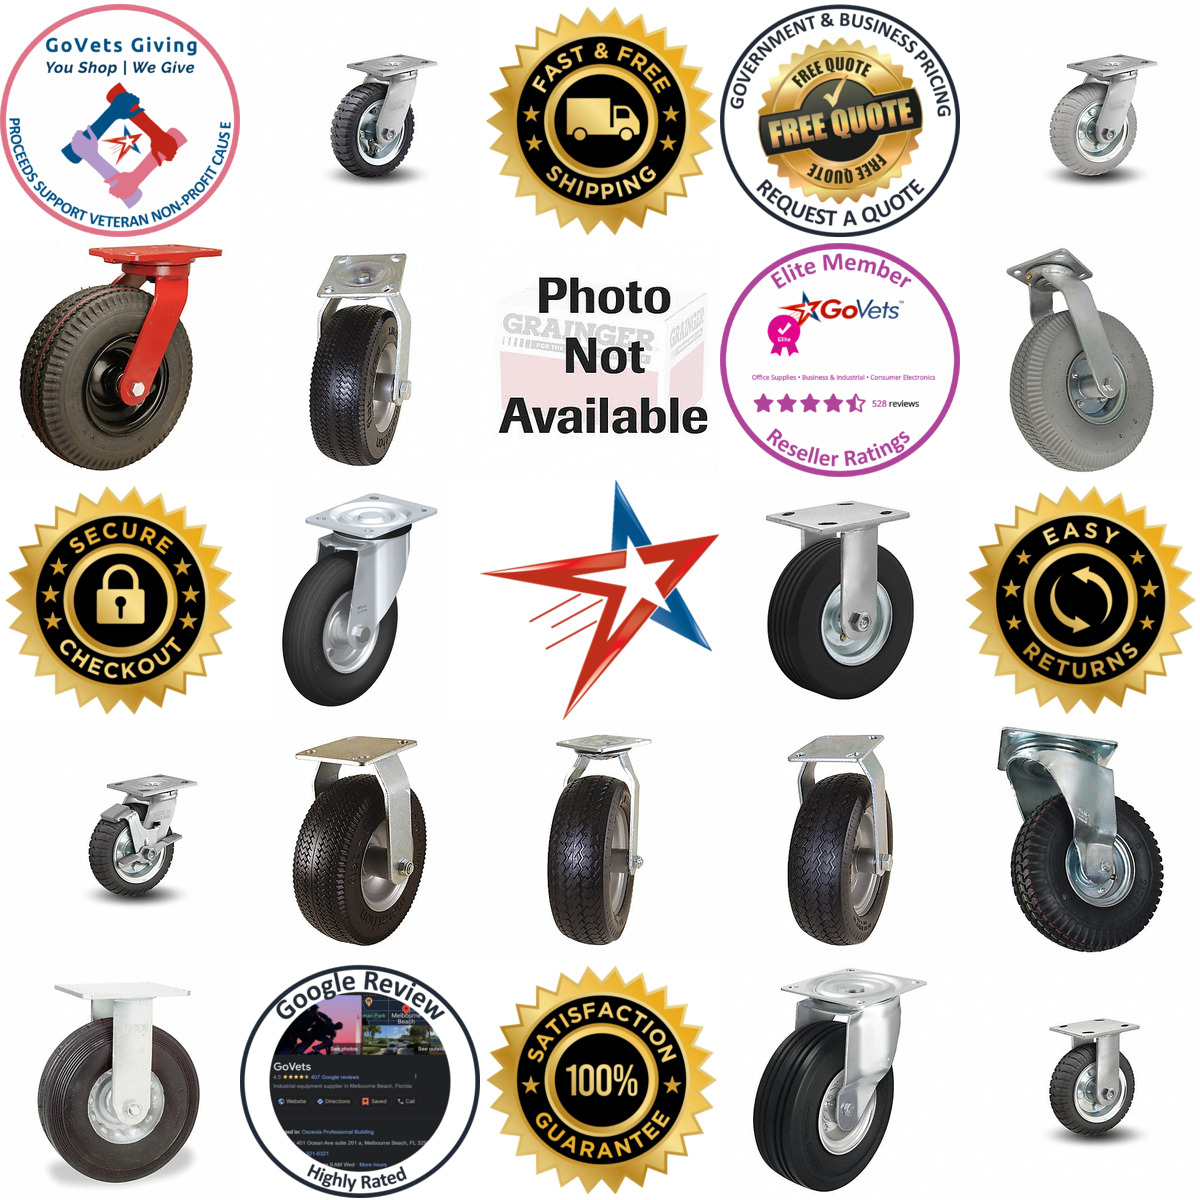 A selection of Pneumatic and Tire Style Casters products on GoVets